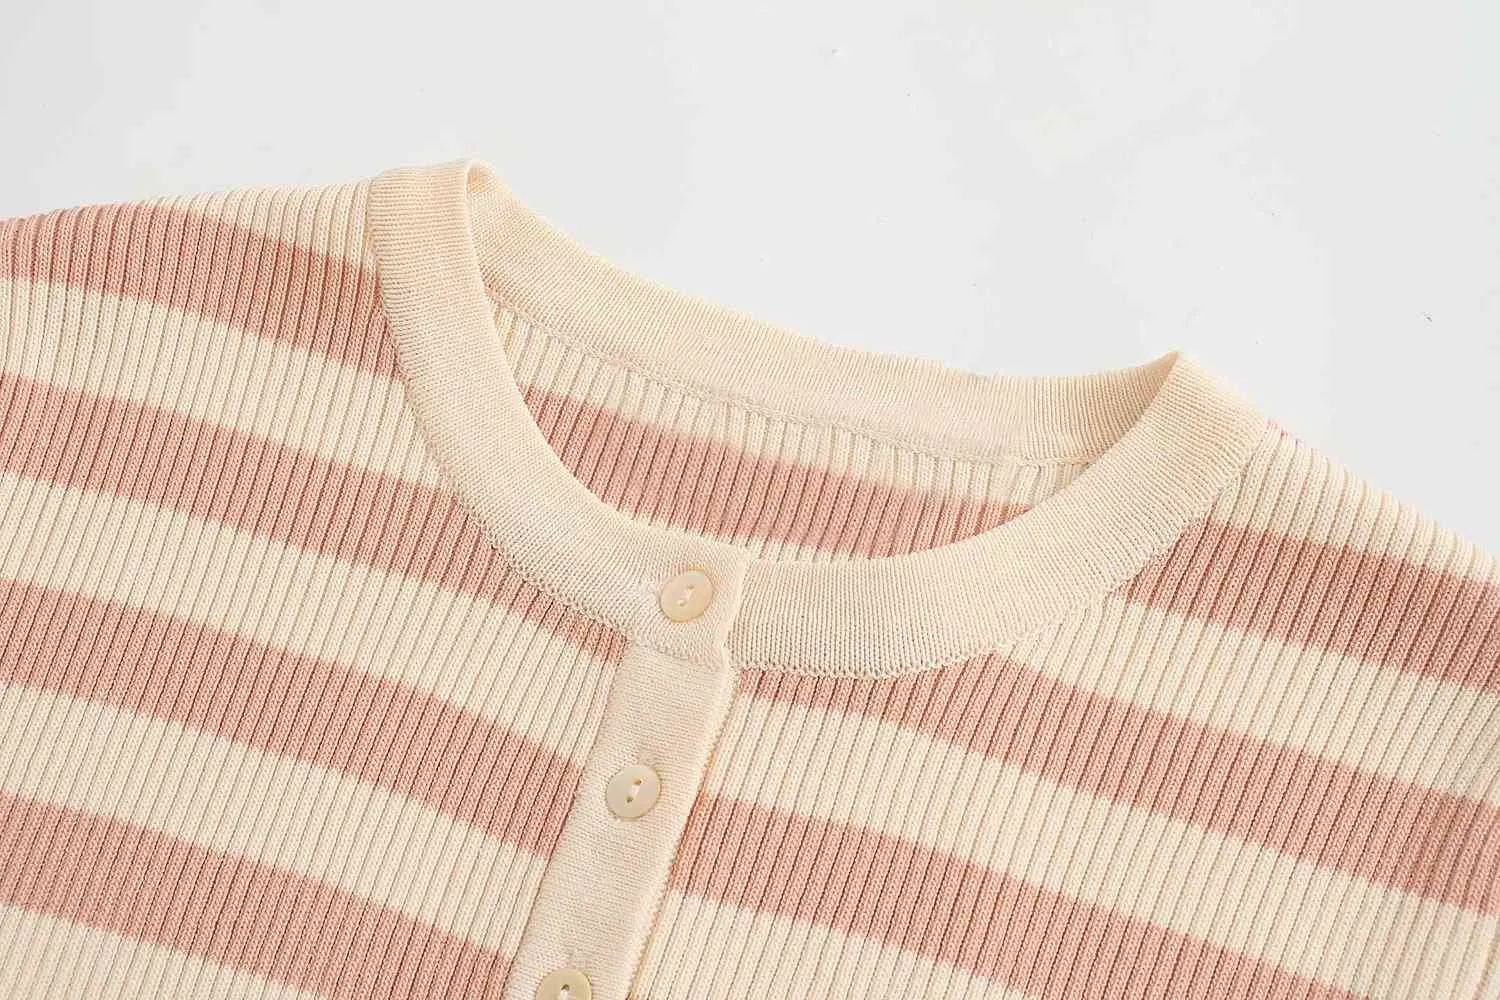 Women Fashion O Neck Striped Print Short Knitted Sweater Coat Female Chic Long Sleeve Cardigans Slim Crop Tops SW811 210420